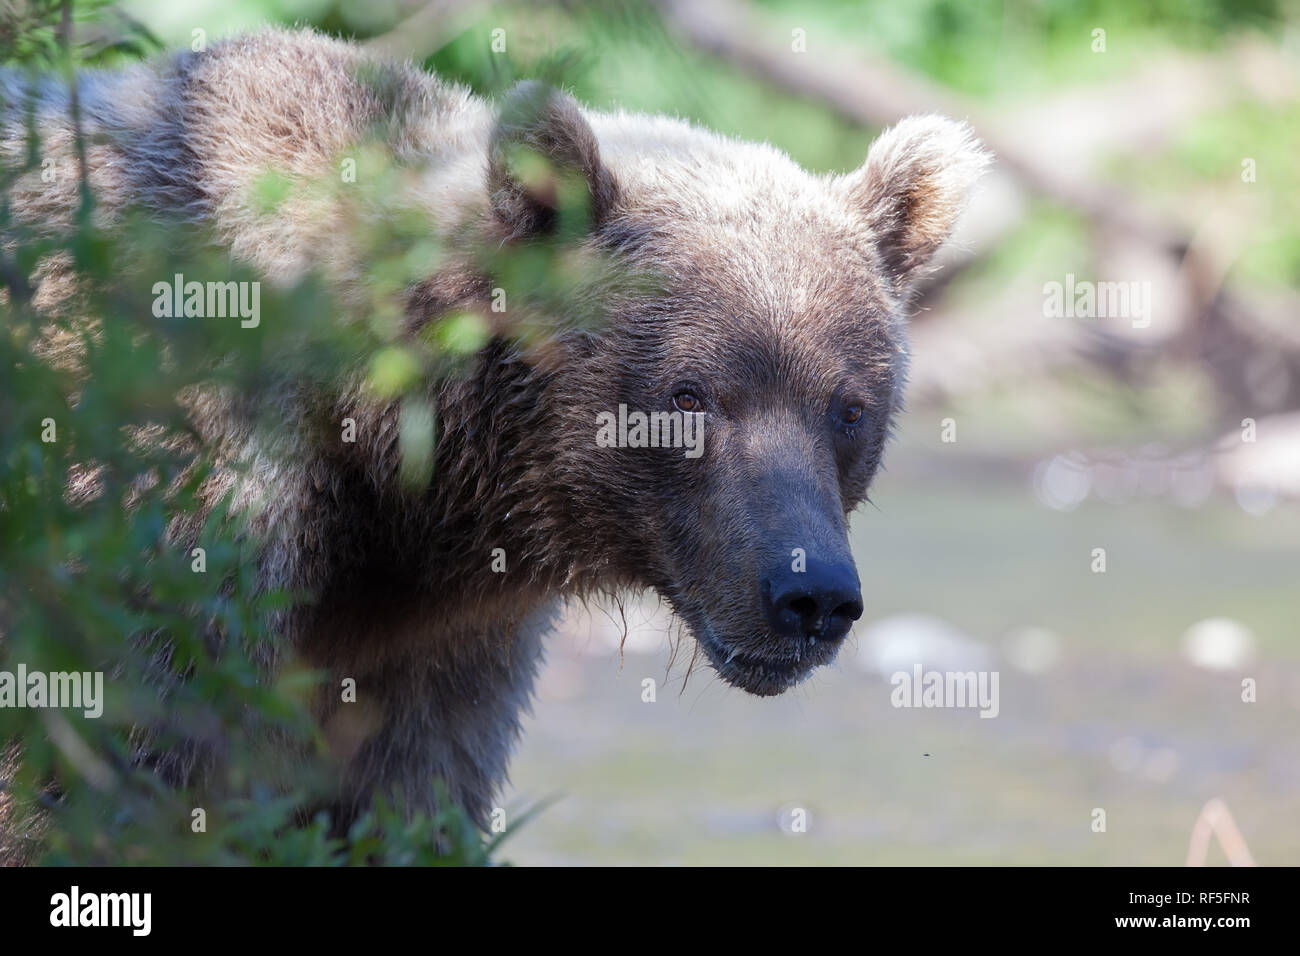 Close-up head of brown wild bear grizzly. Kamchatka. Russia. Stock Photo